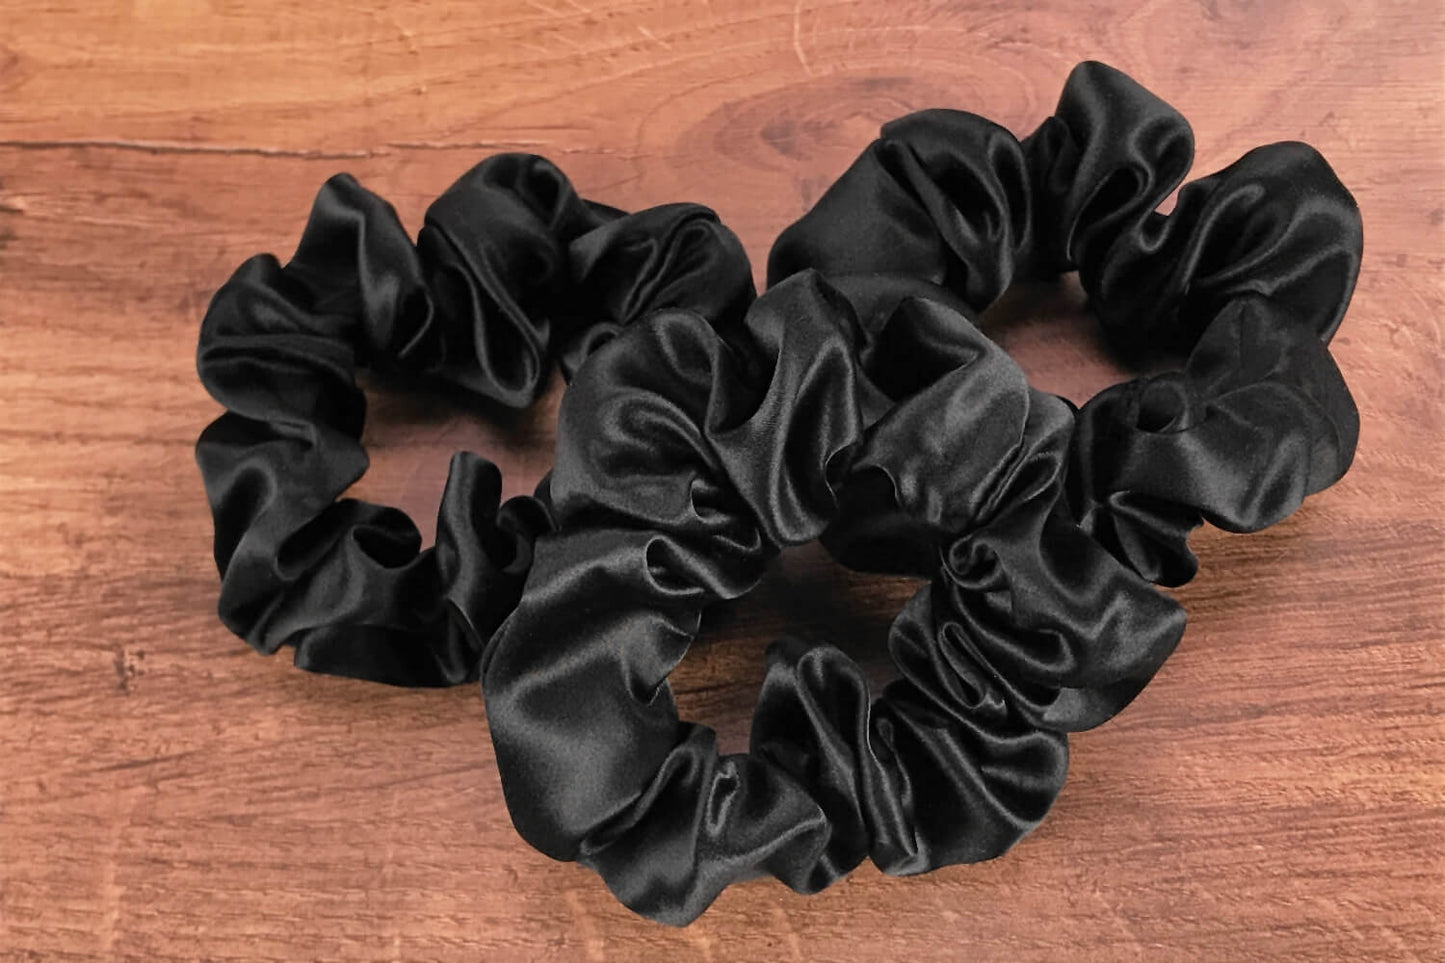 Large black silk hair ties by Celestial Silk laying in a pile on a wood vanity